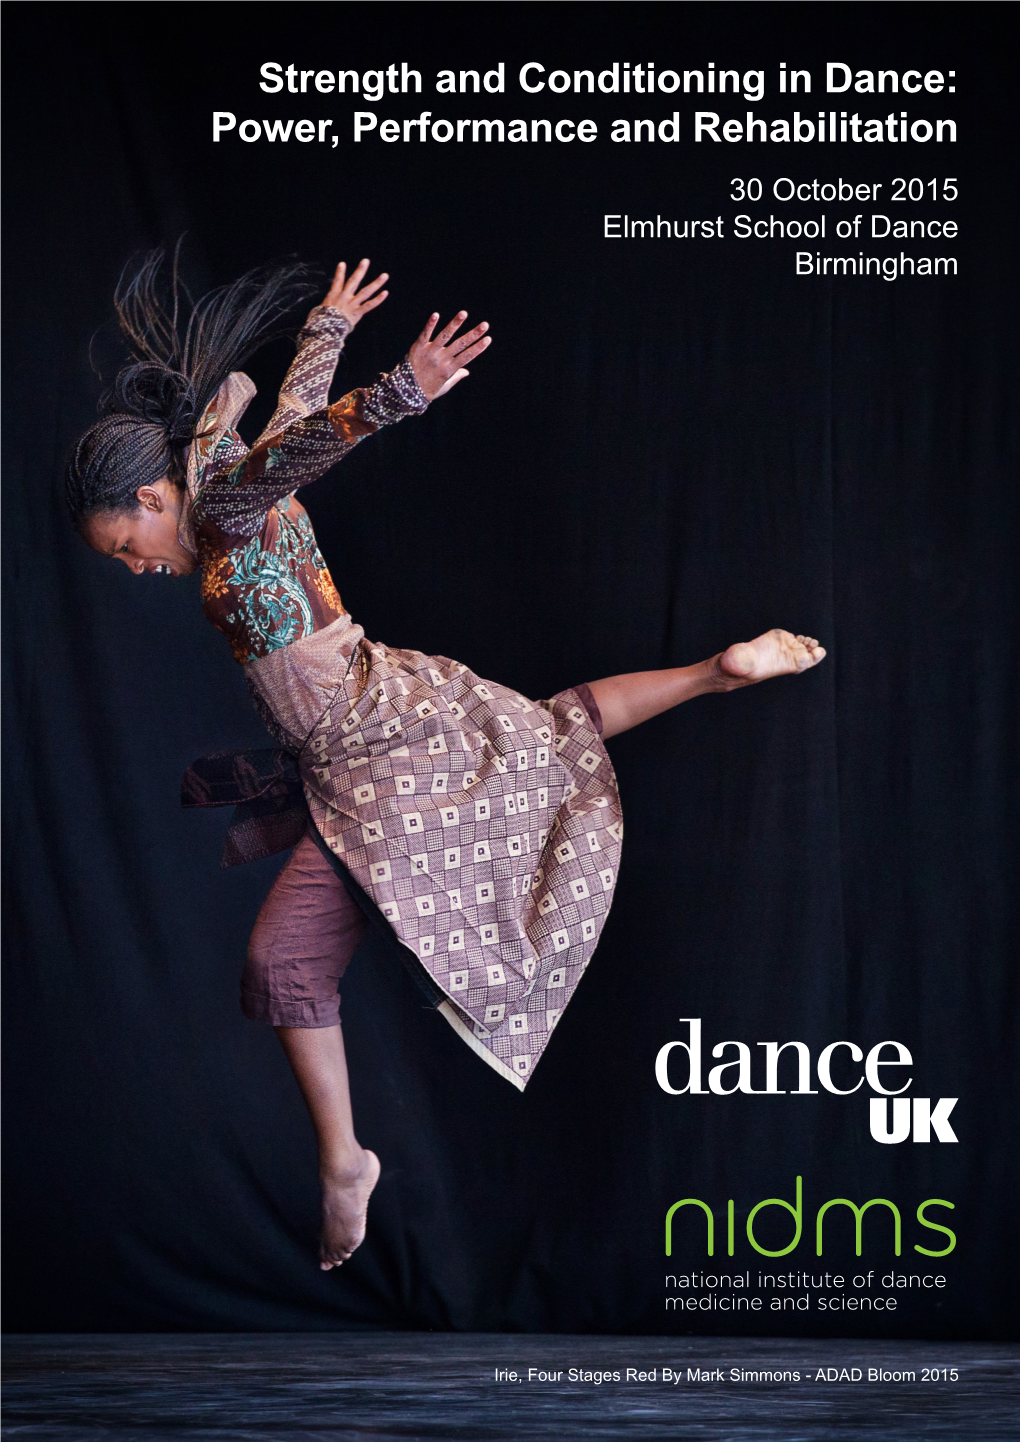 Strength and Conditioning in Dance: Power, Performance and Rehabilitation 30 October 2015 Elmhurst School of Dance Birmingham